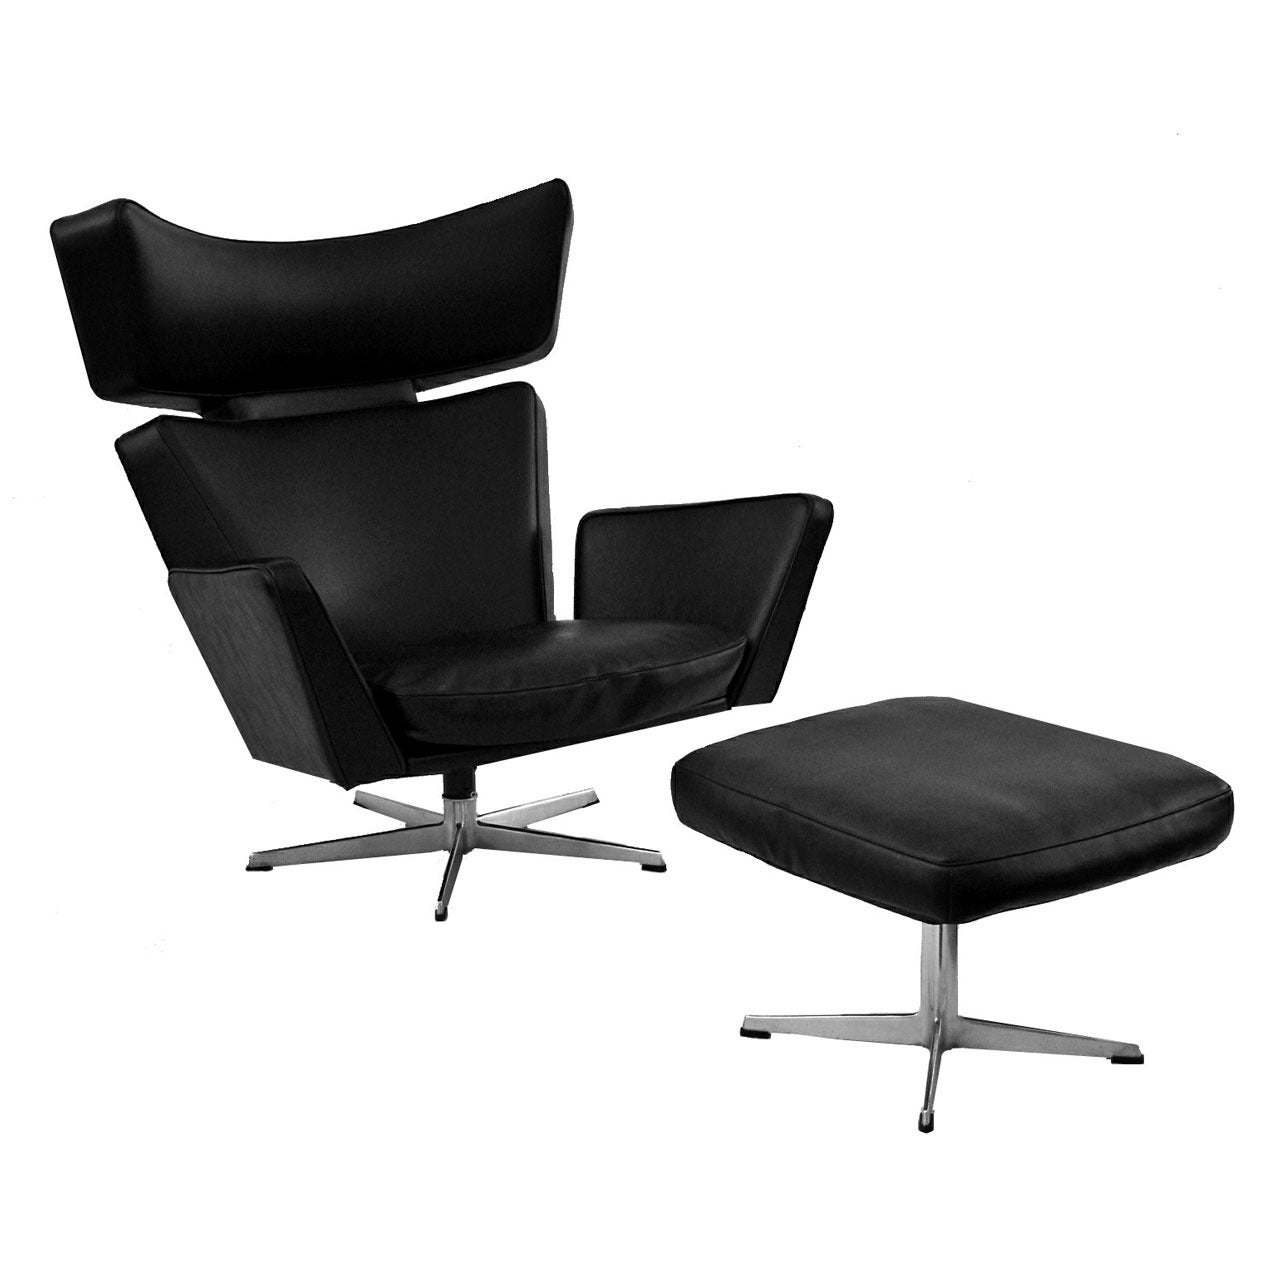 Ox Chair and Ottoman by Arne Jacobsen for Fritz Hansen